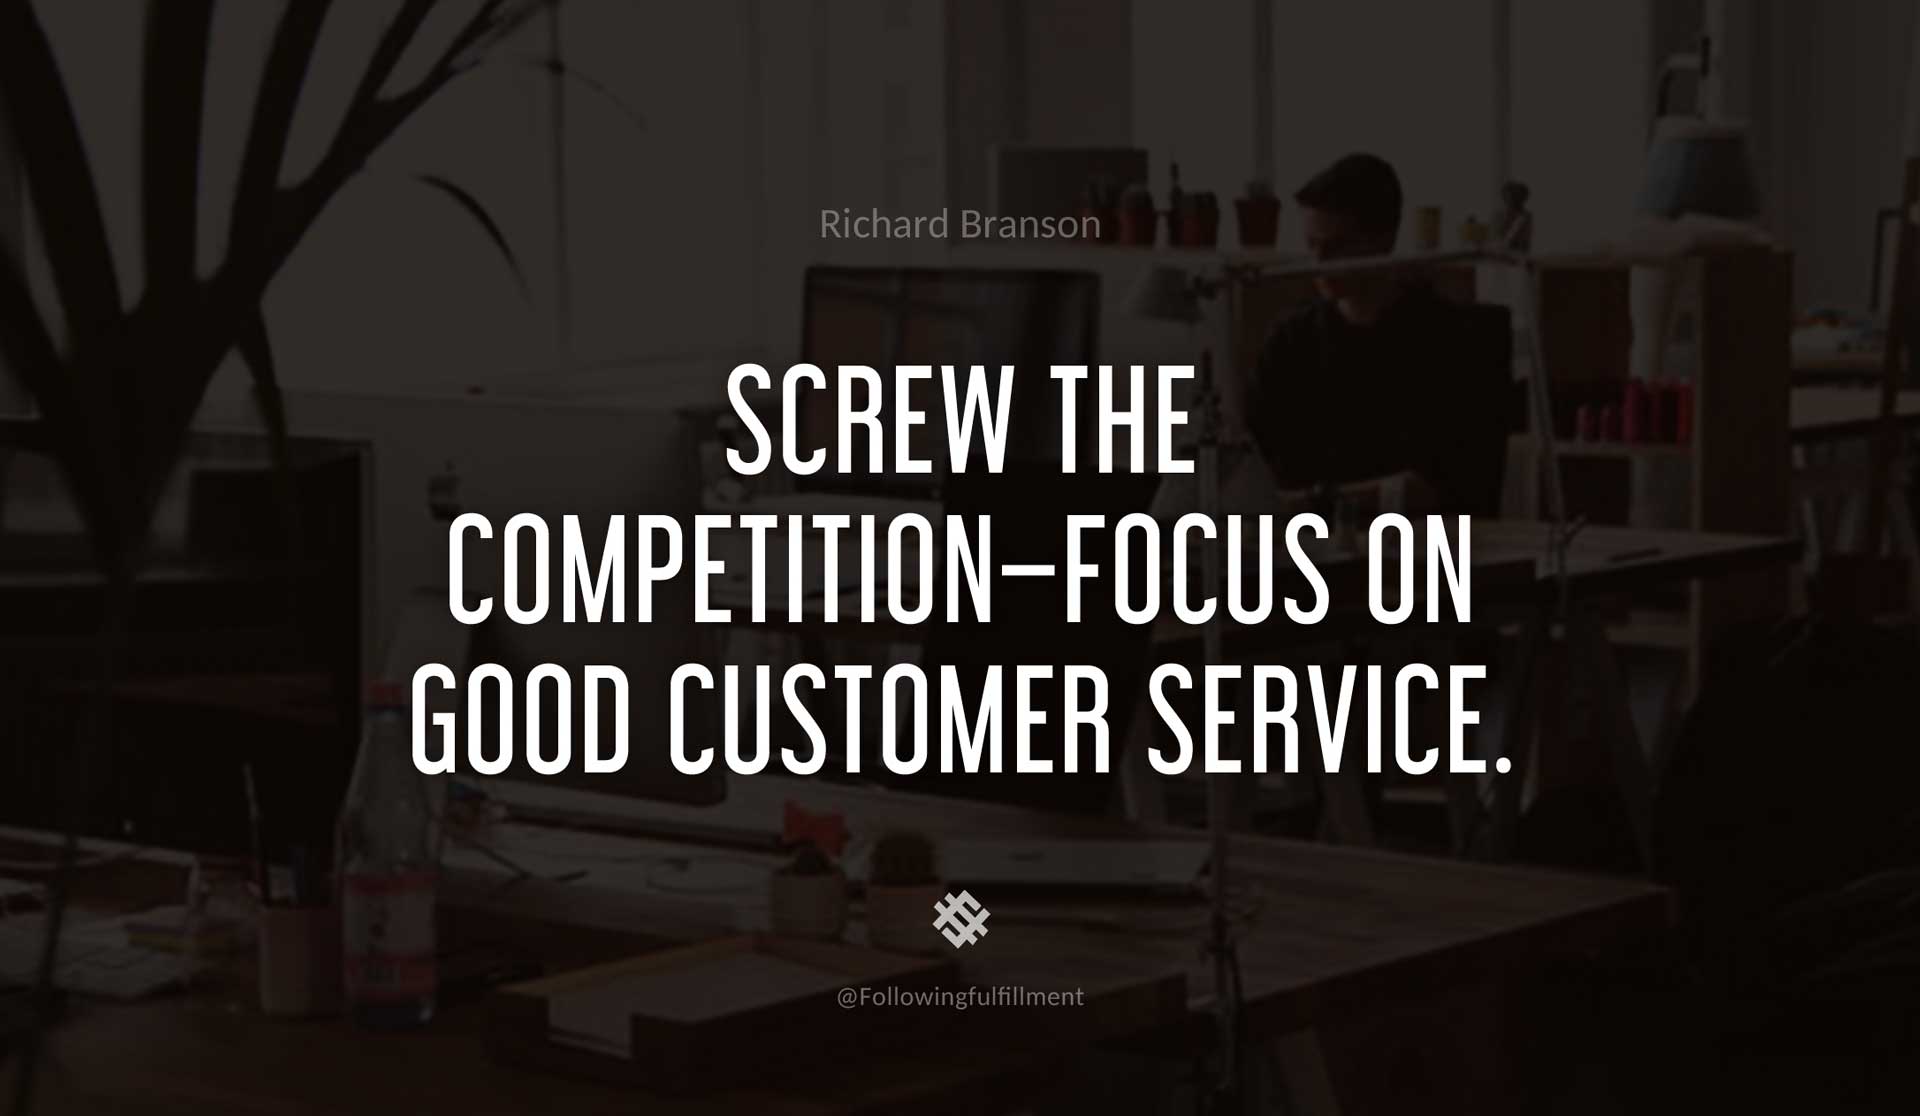 Screw-the-competition-focus-on-good-customer-service.--RICHARD-BRANSON-Quote.jpg